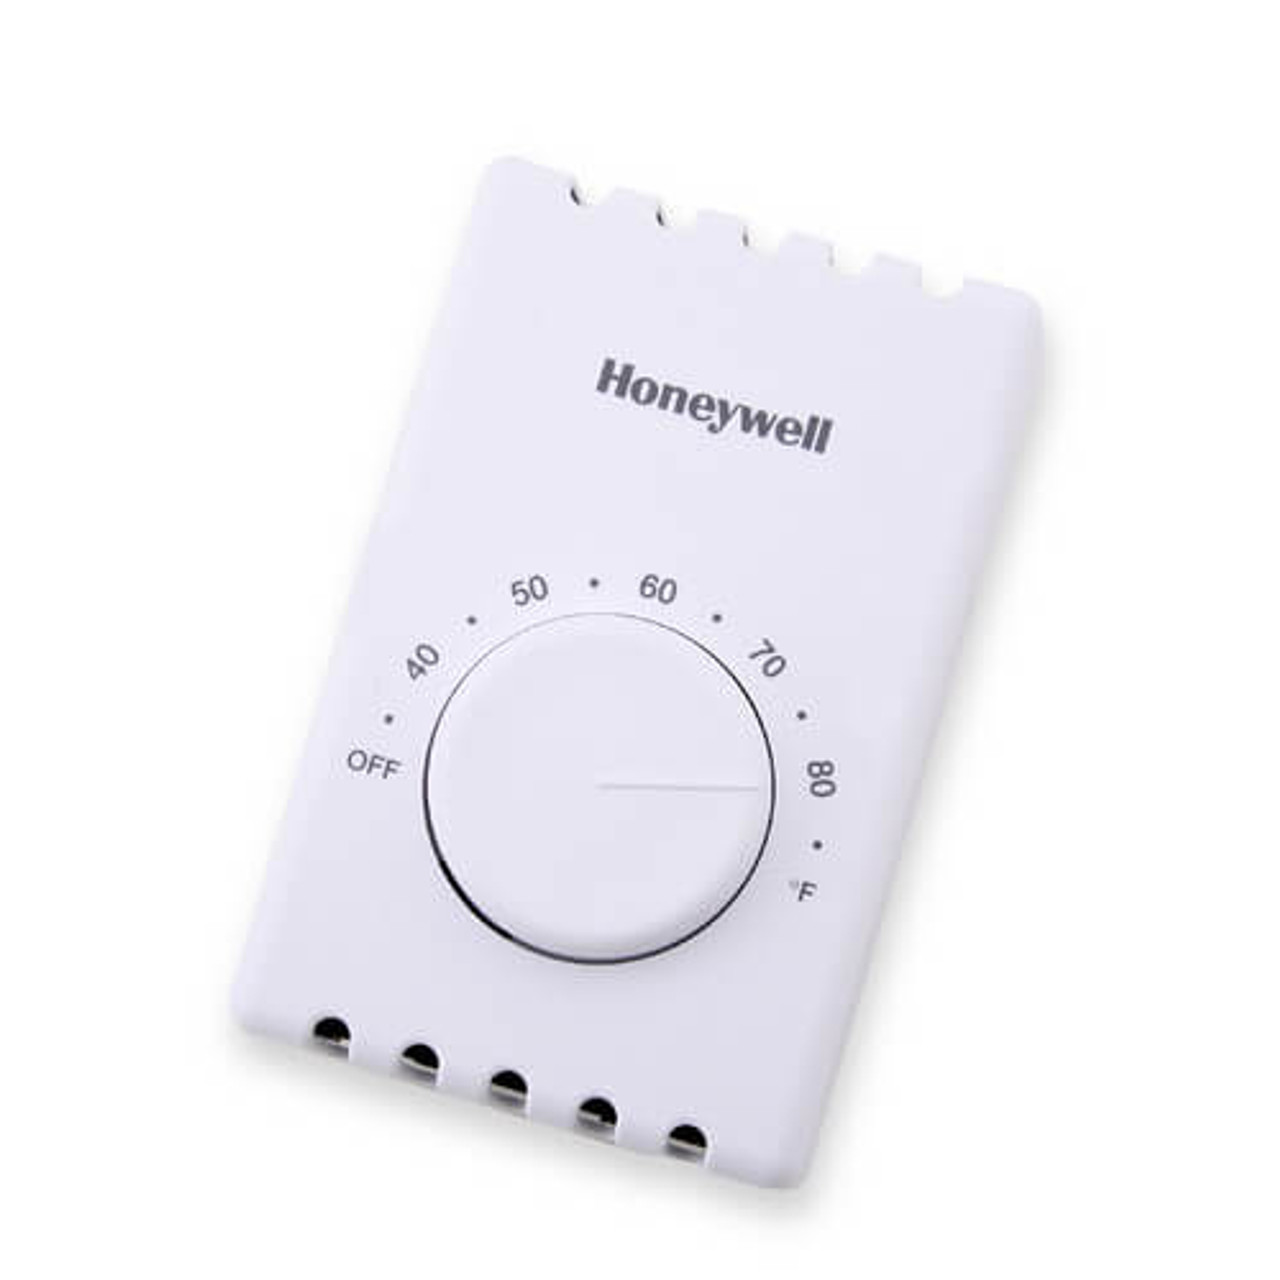 Details about   Honeywell t678d1004 thermostats 